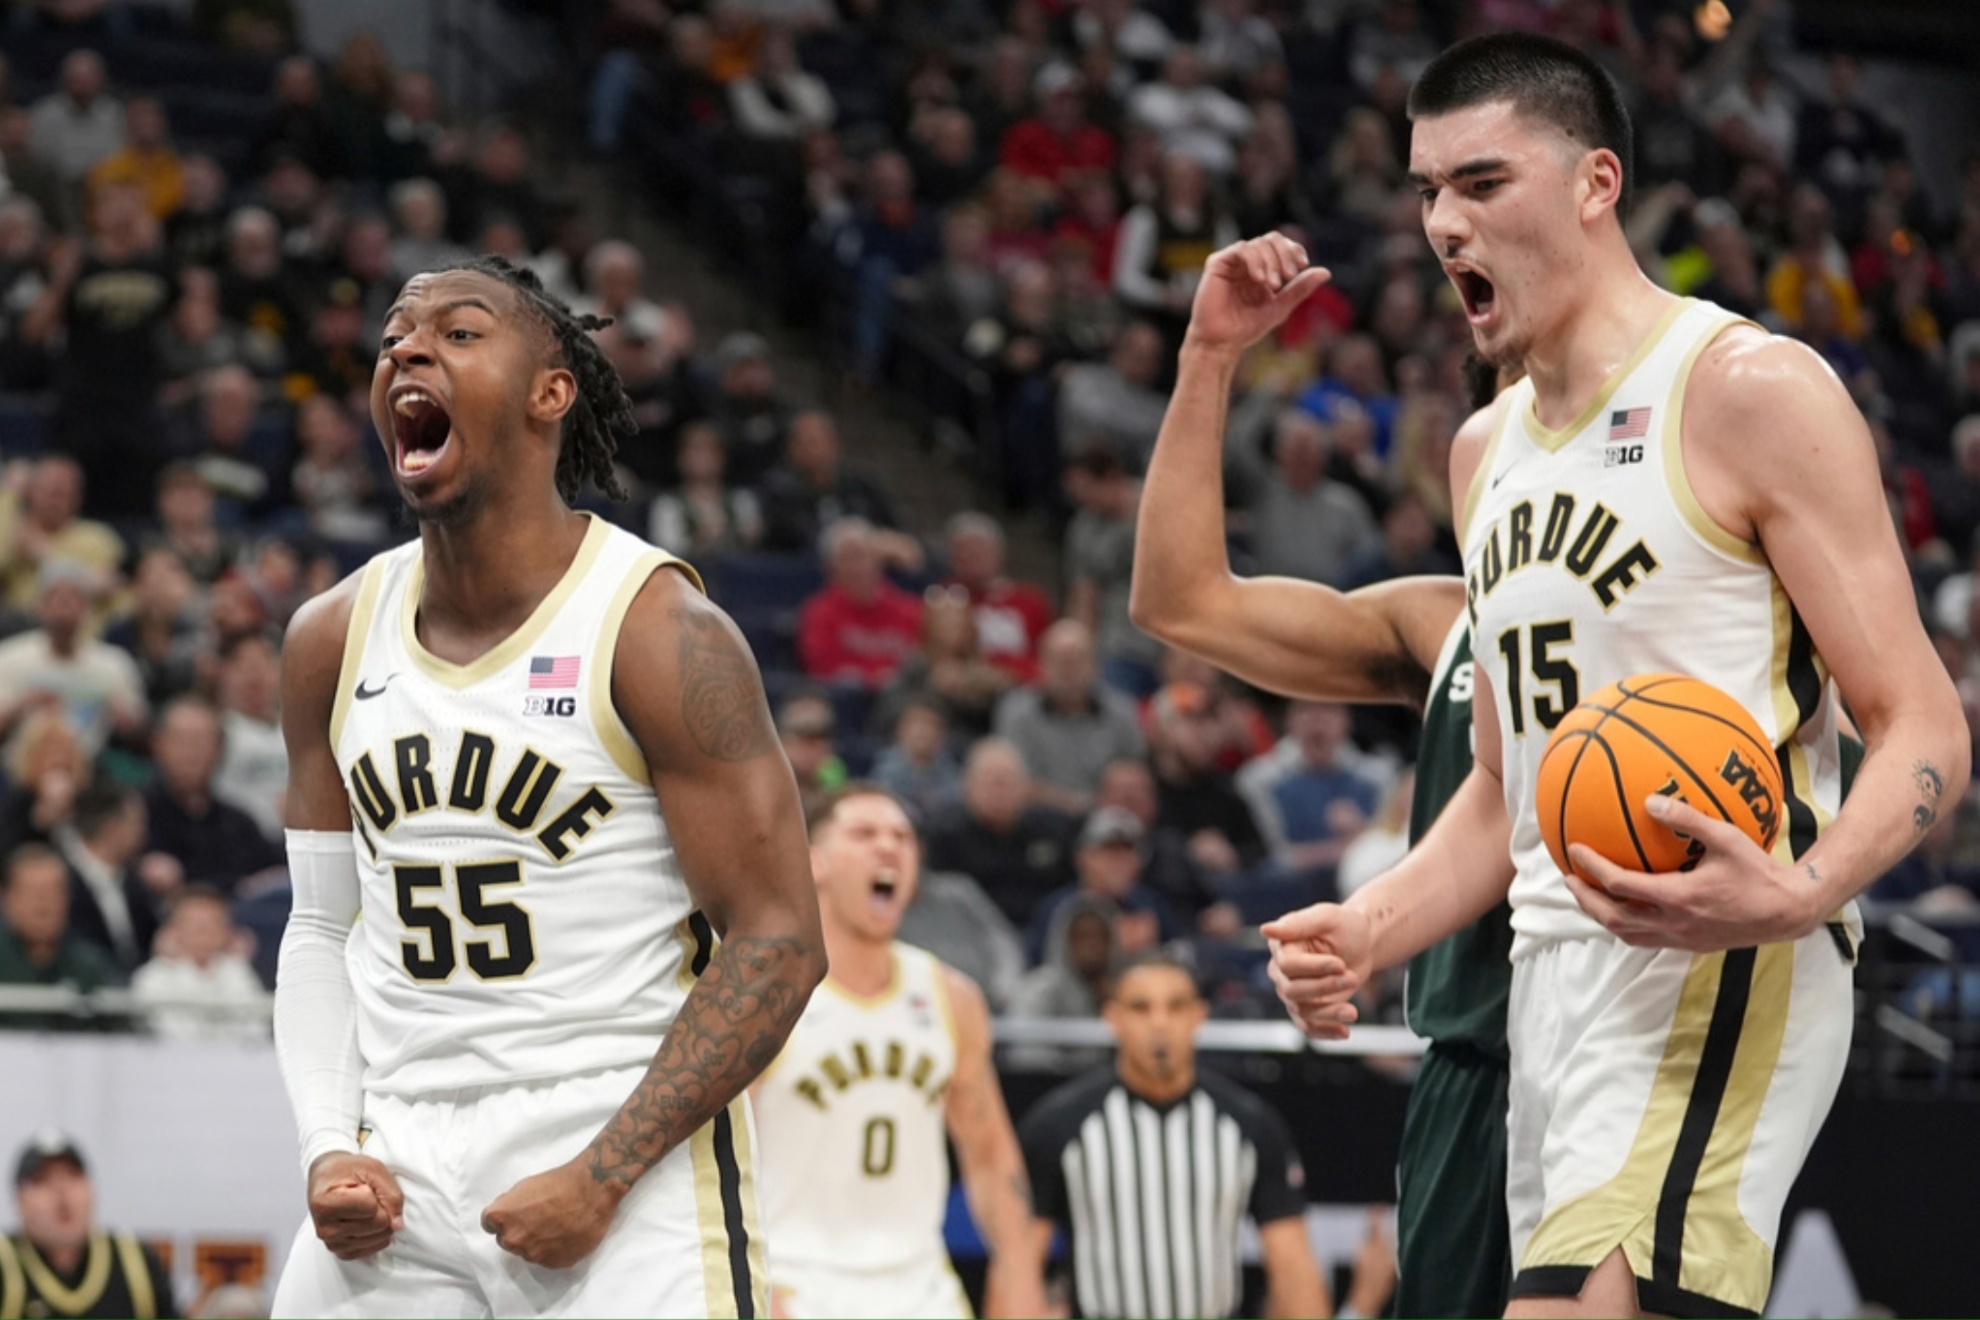 Purdue will try to avoid dissapointment in the first round of the NCAA Tournament against Grambling State